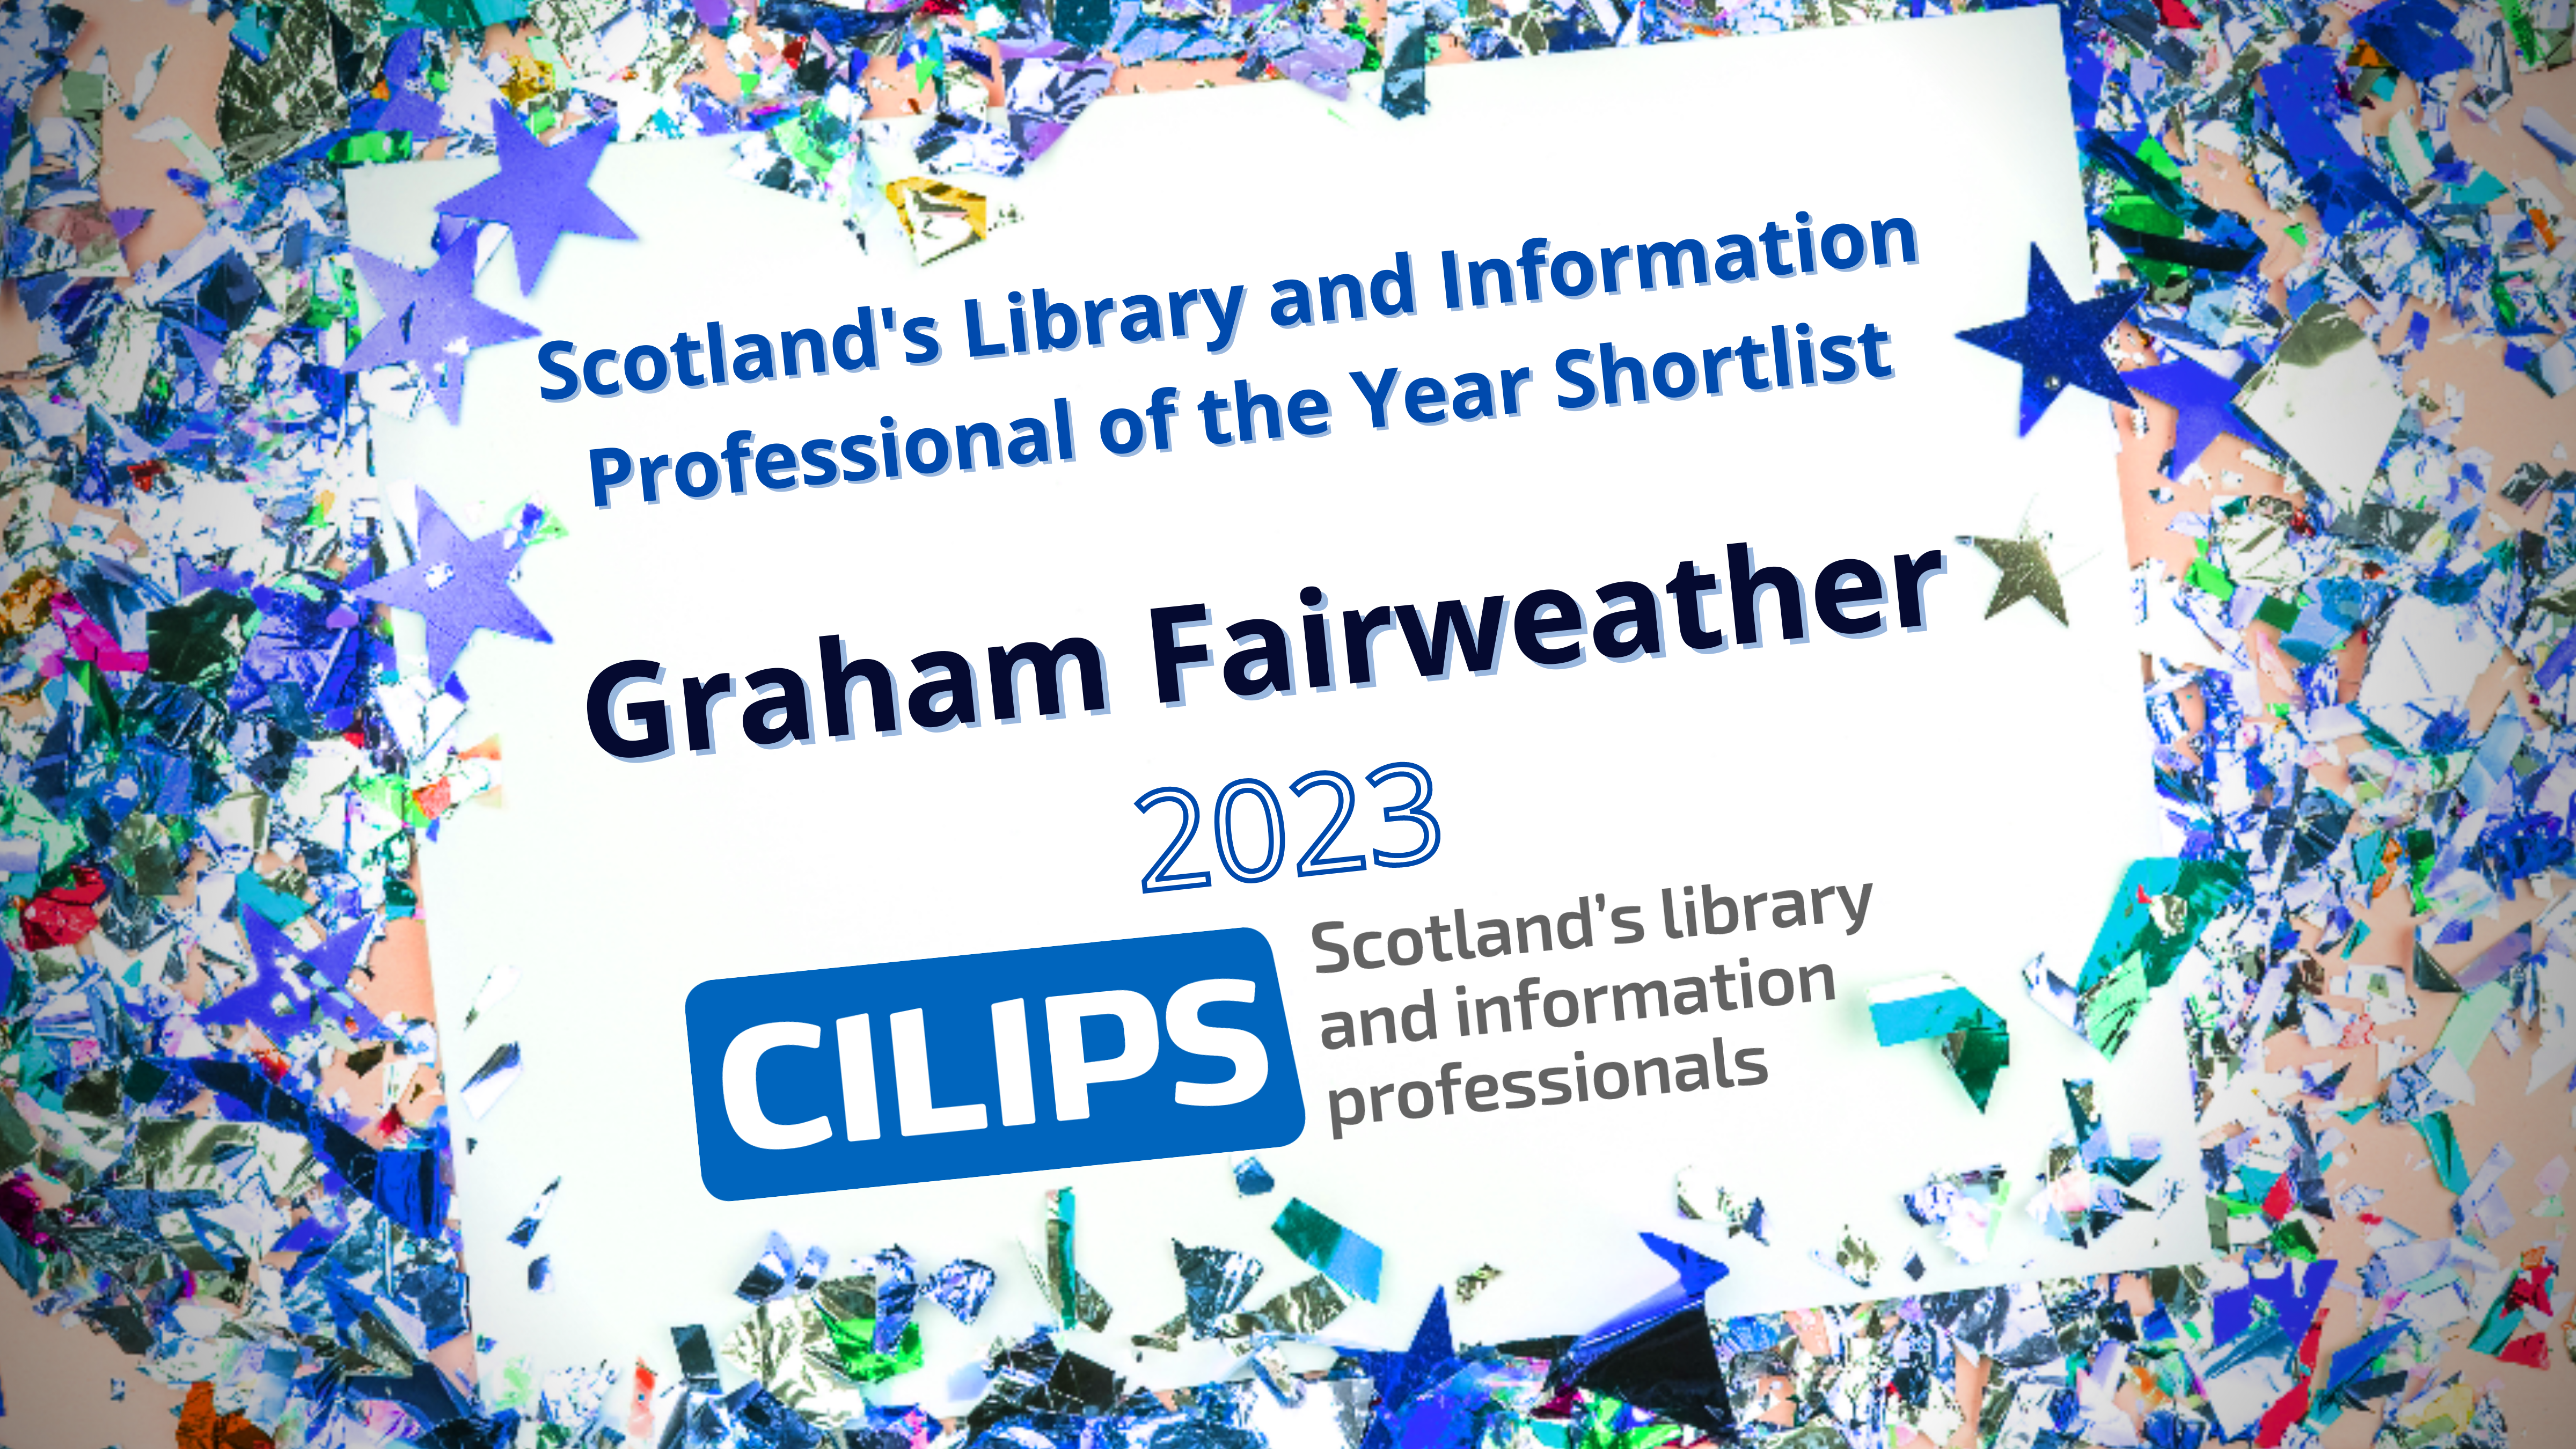 Scotland's library and Information Professional of the Year Shortlist. Graham Fairweather, 2023. CILIPS blue and grey logo. White paper background with mixed blue confetti around the outside.